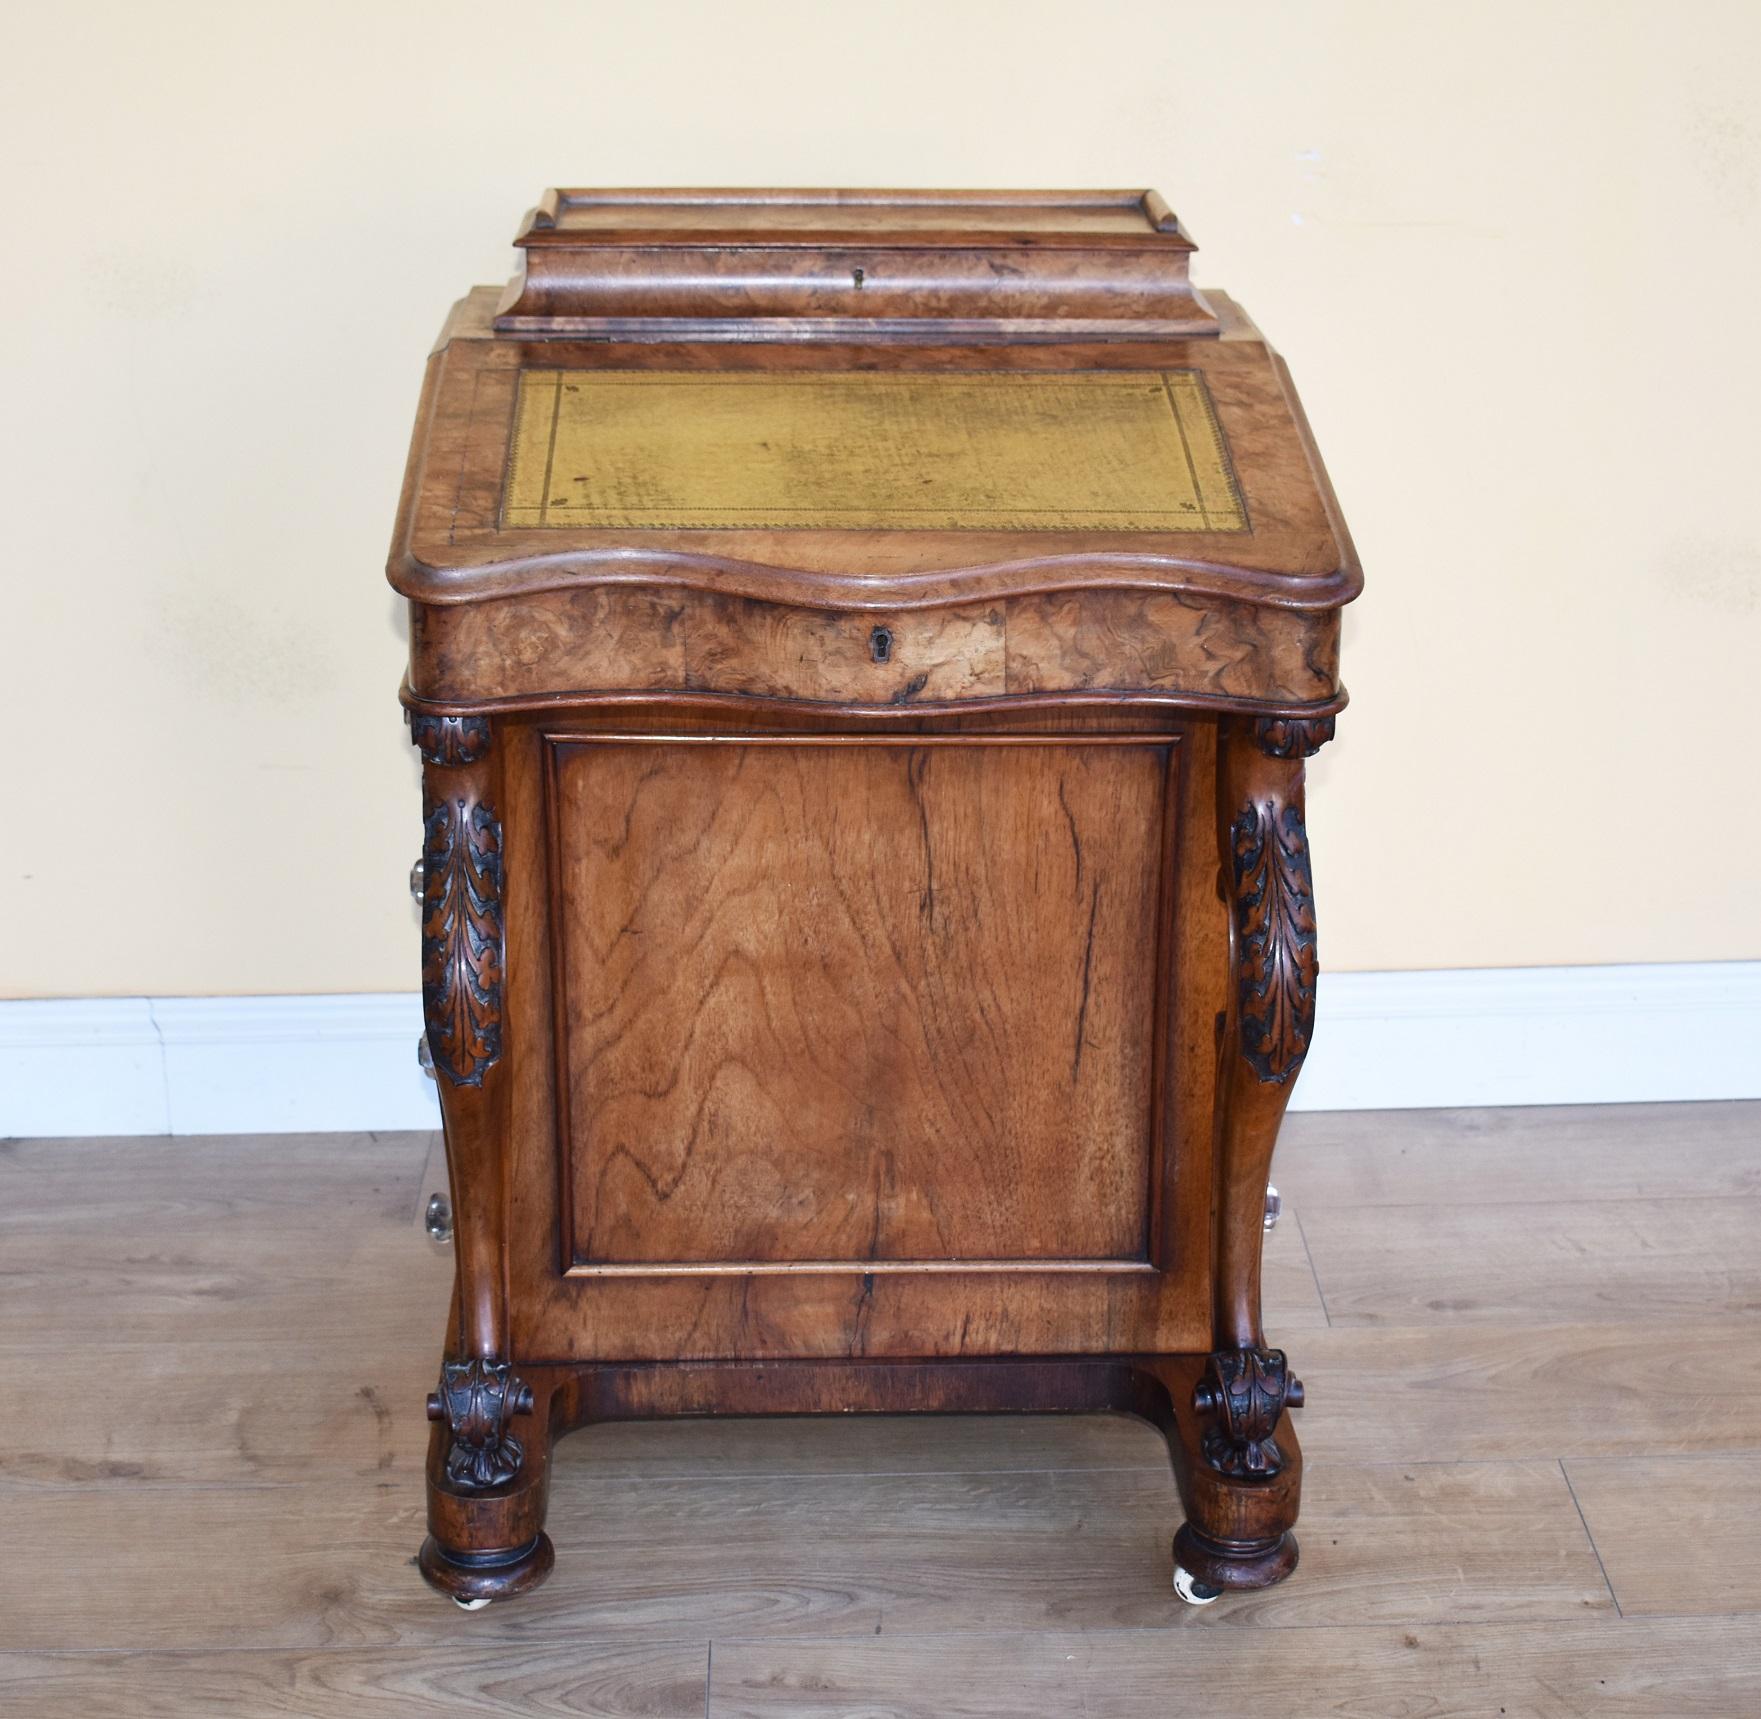 For sale is a good quality 19th century Victorian burr walnut davenport. The davenport is serpentine in form, having a shaped leather skiver writing surface, lifting to reveal a veneered interior with storage space. Below this, one side is fitted